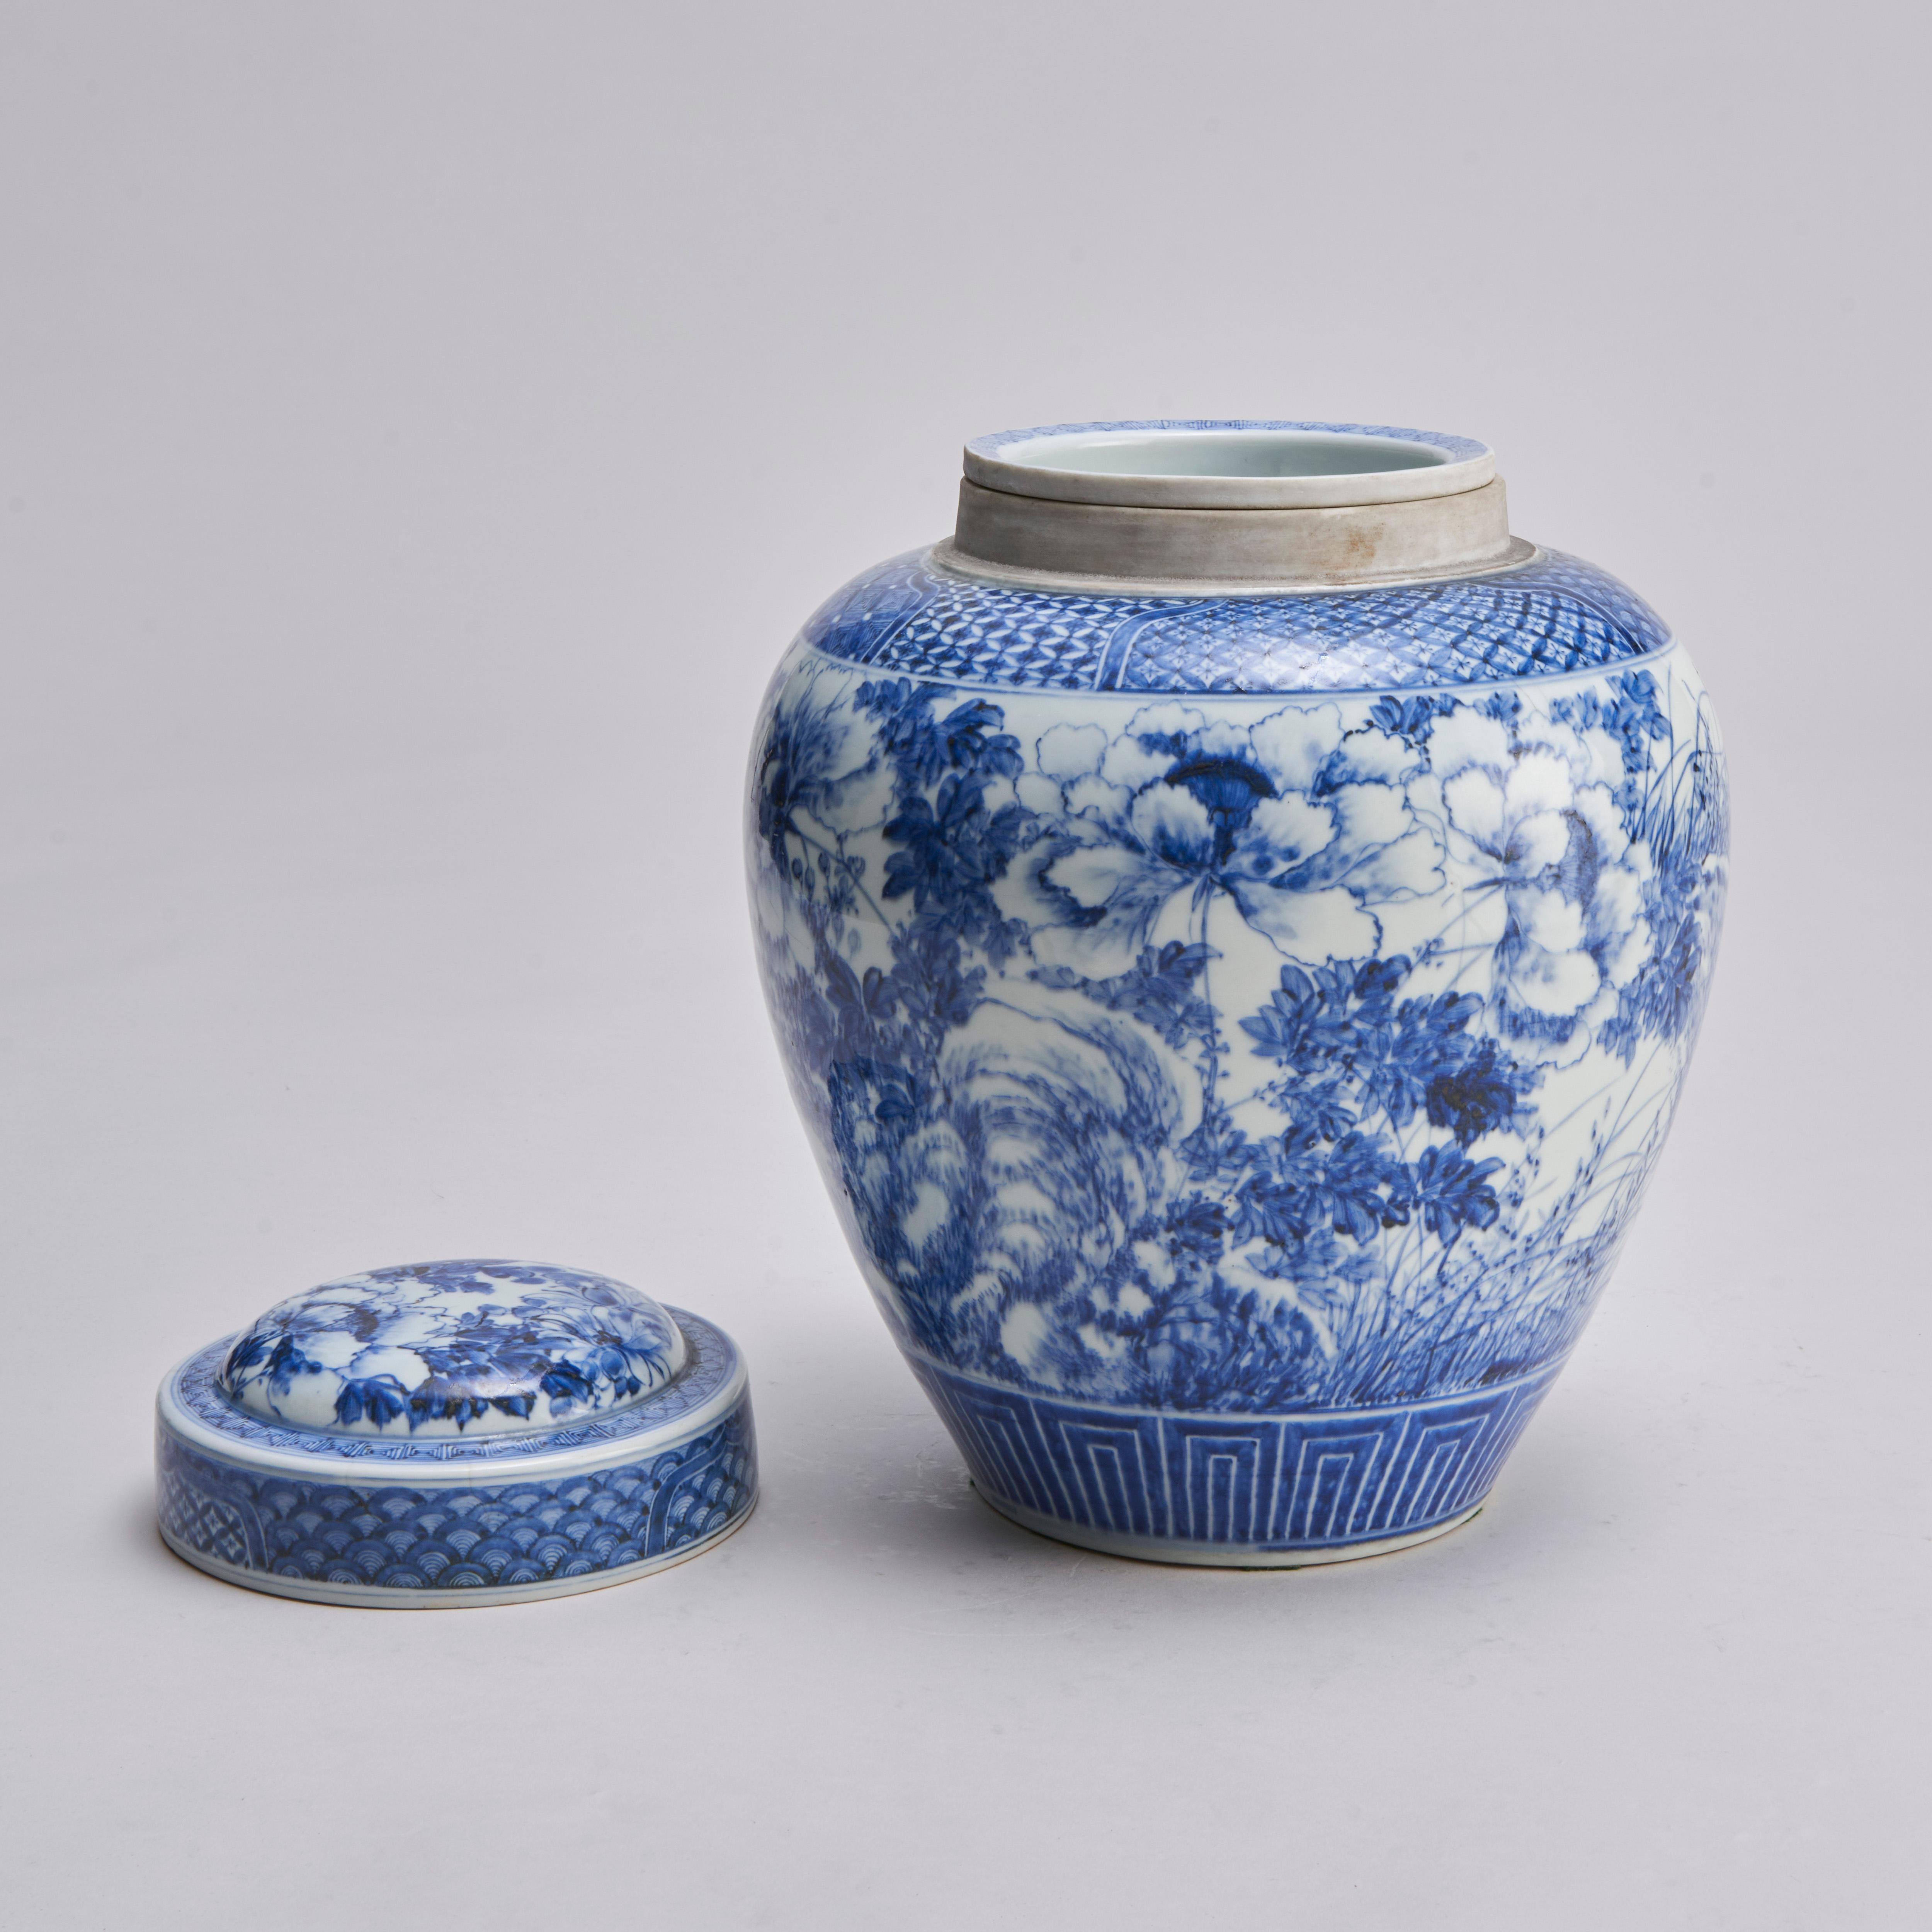 An unusual Japanese porcelain blue and white jar with inner stopper For Sale 2